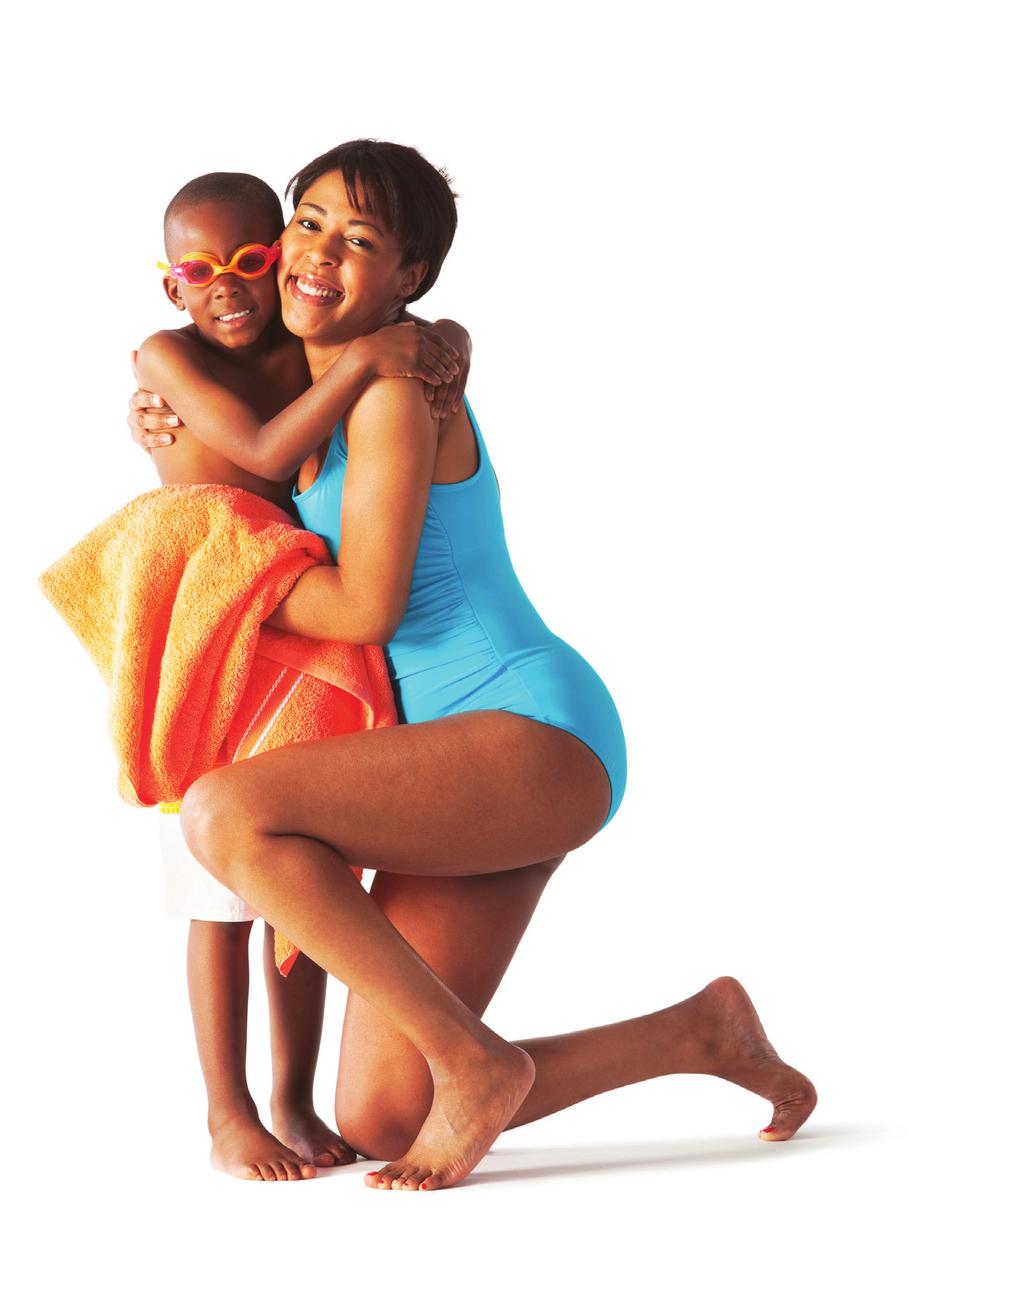 Swim Lessons YMCA swim lessons are taught by nationally certified instructors with additional safety training in CPR, First Aid, AED and O 2 administration.